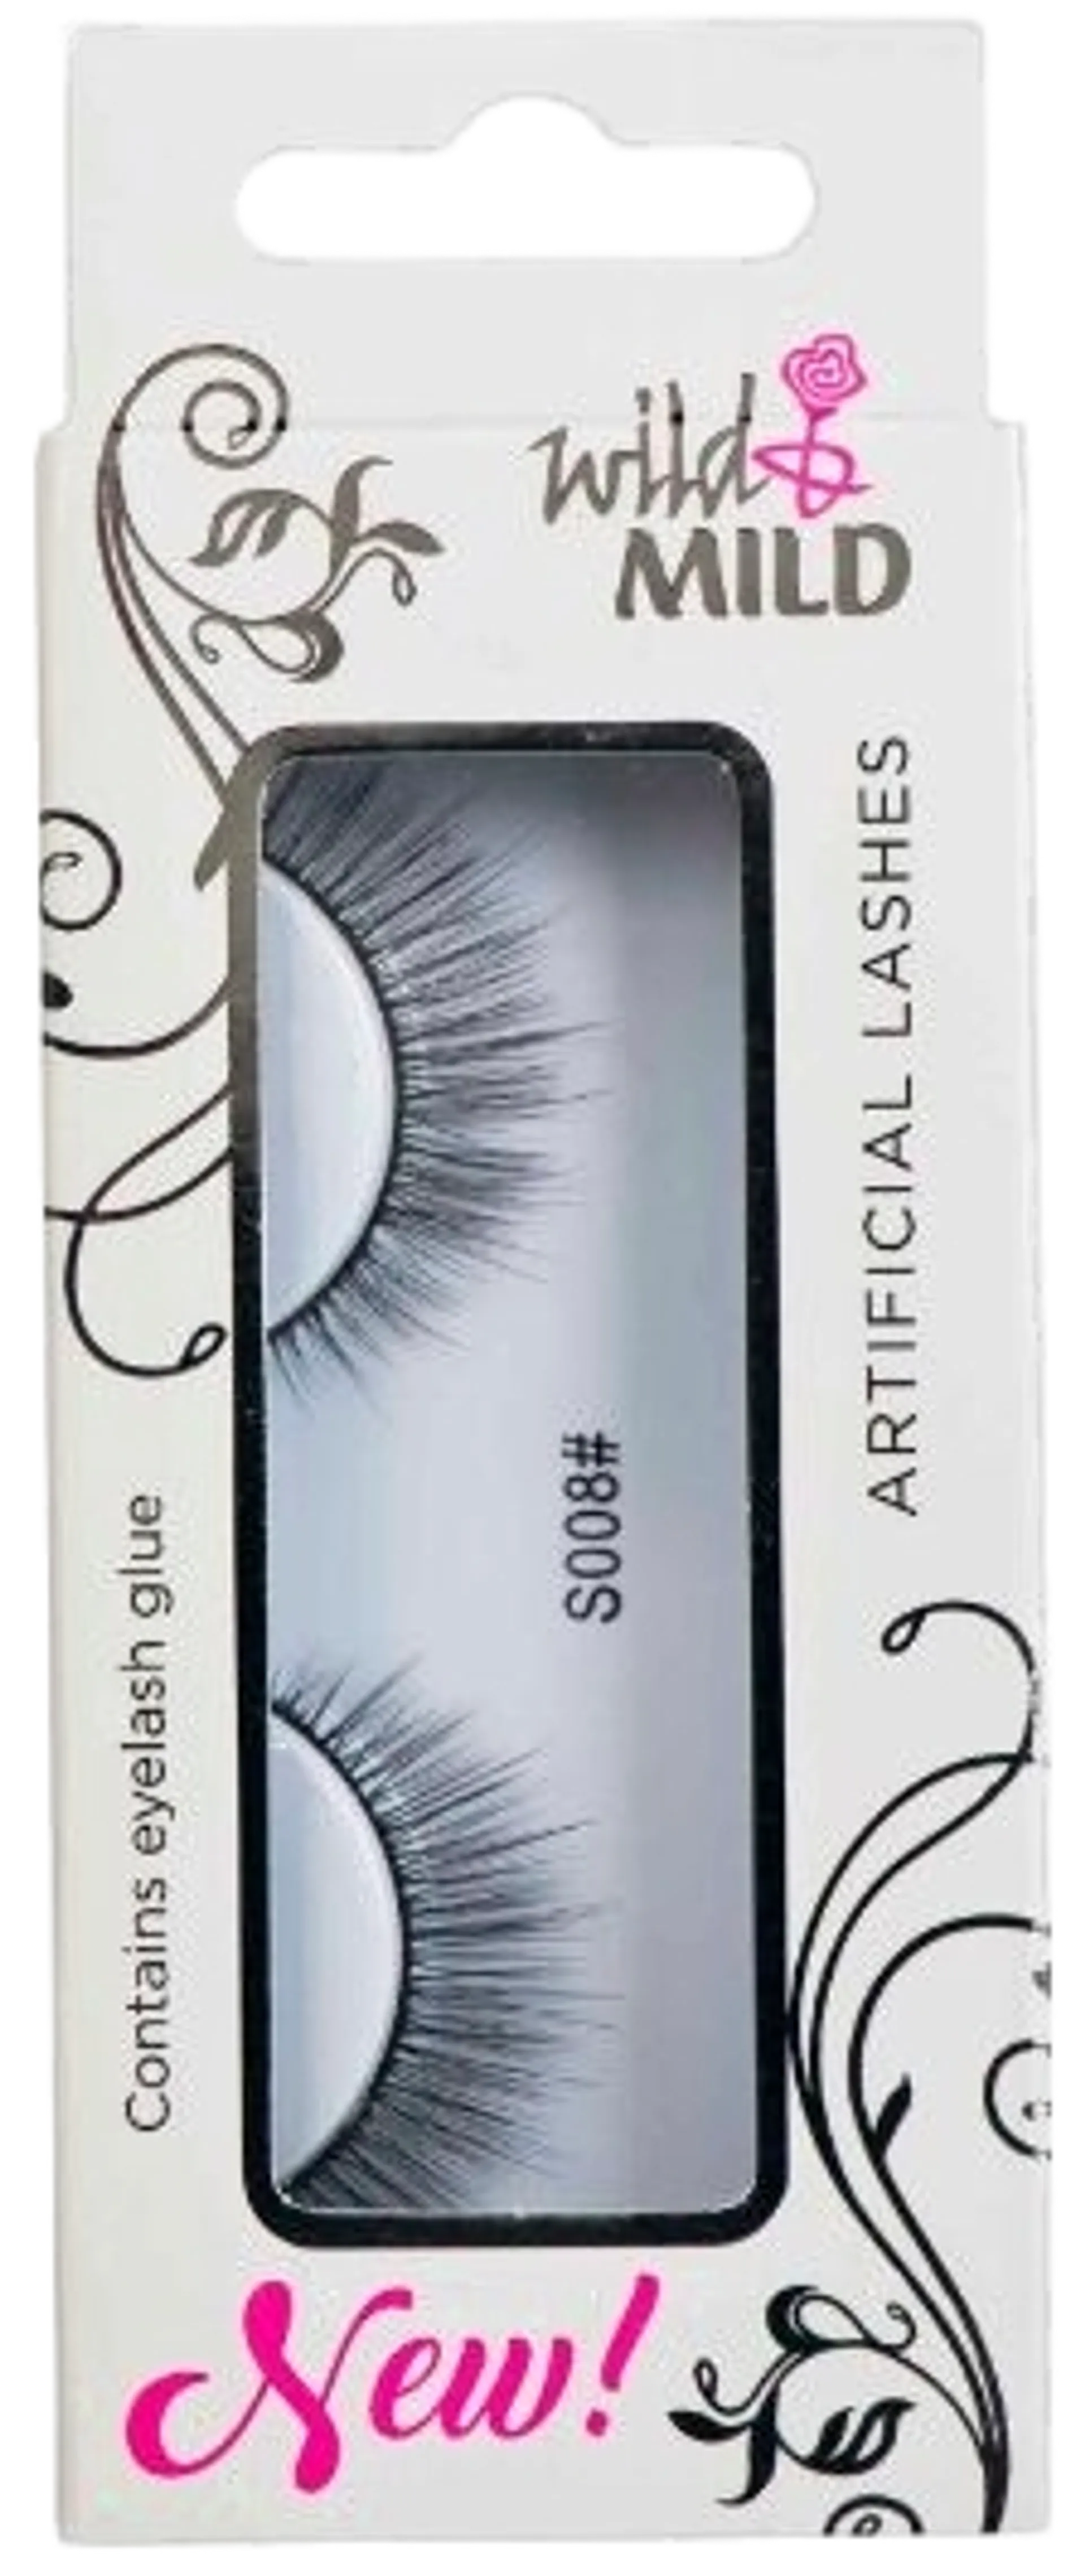 S008 Holiday Vibes Artificial Lashes Wild&Mild